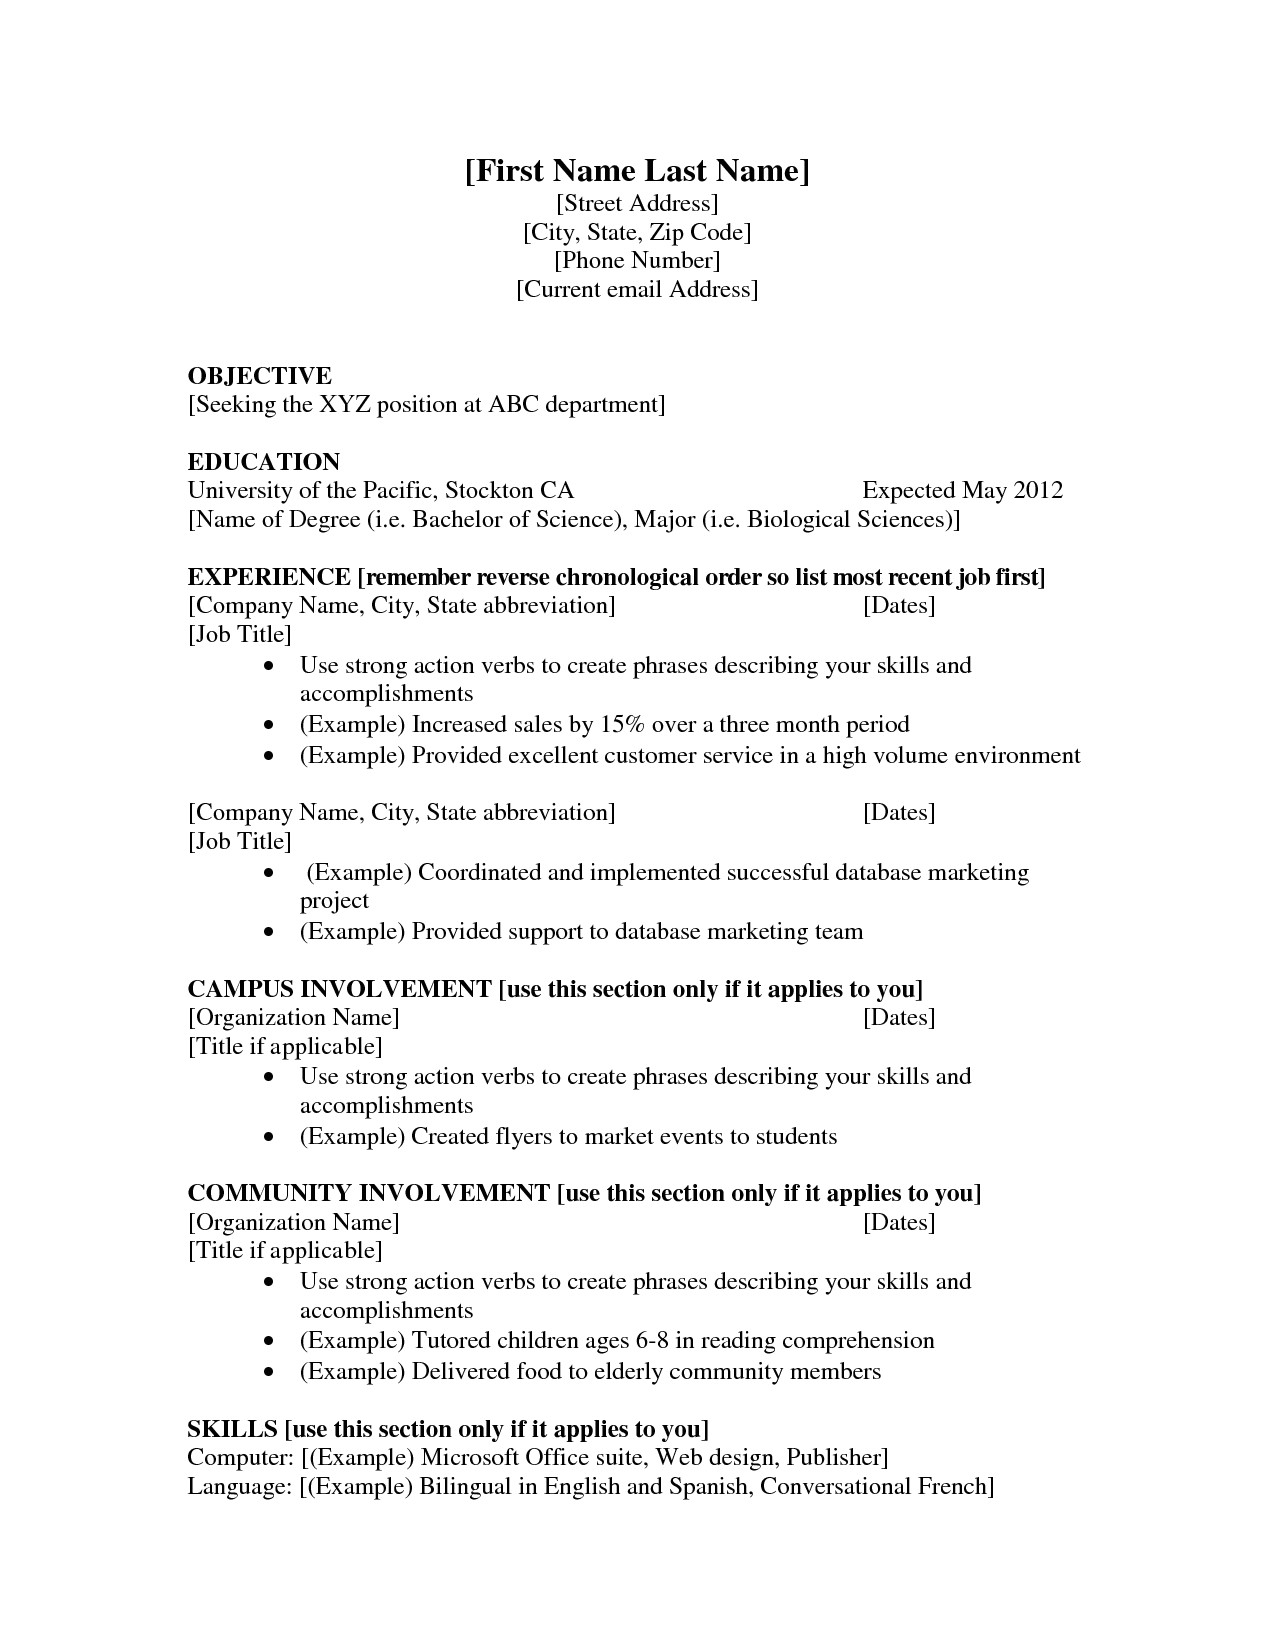 20 first job resume tips